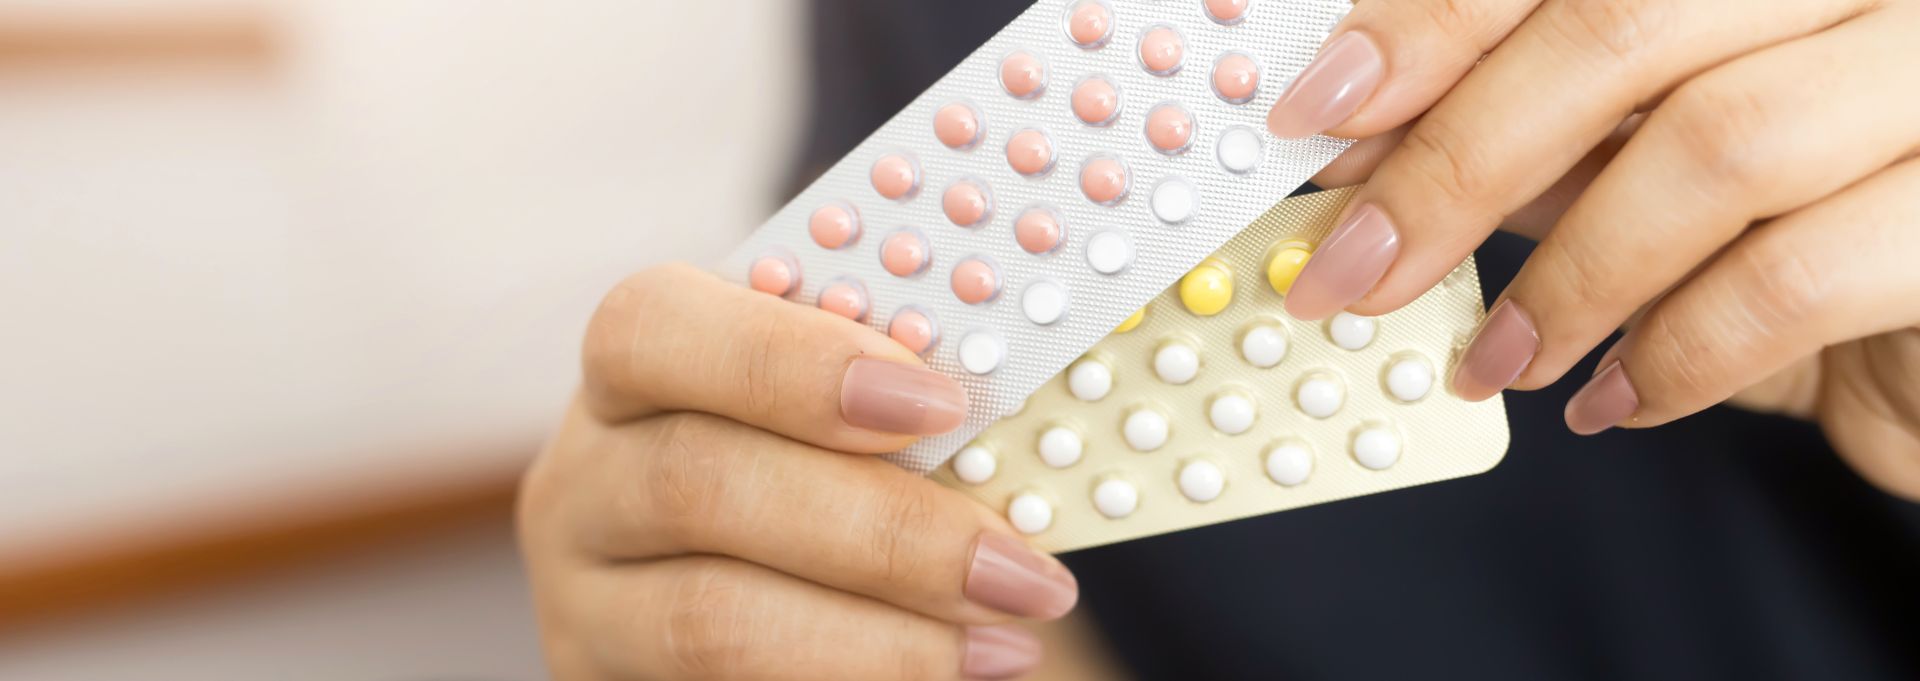 Contraception 101: Making Informed Decisions